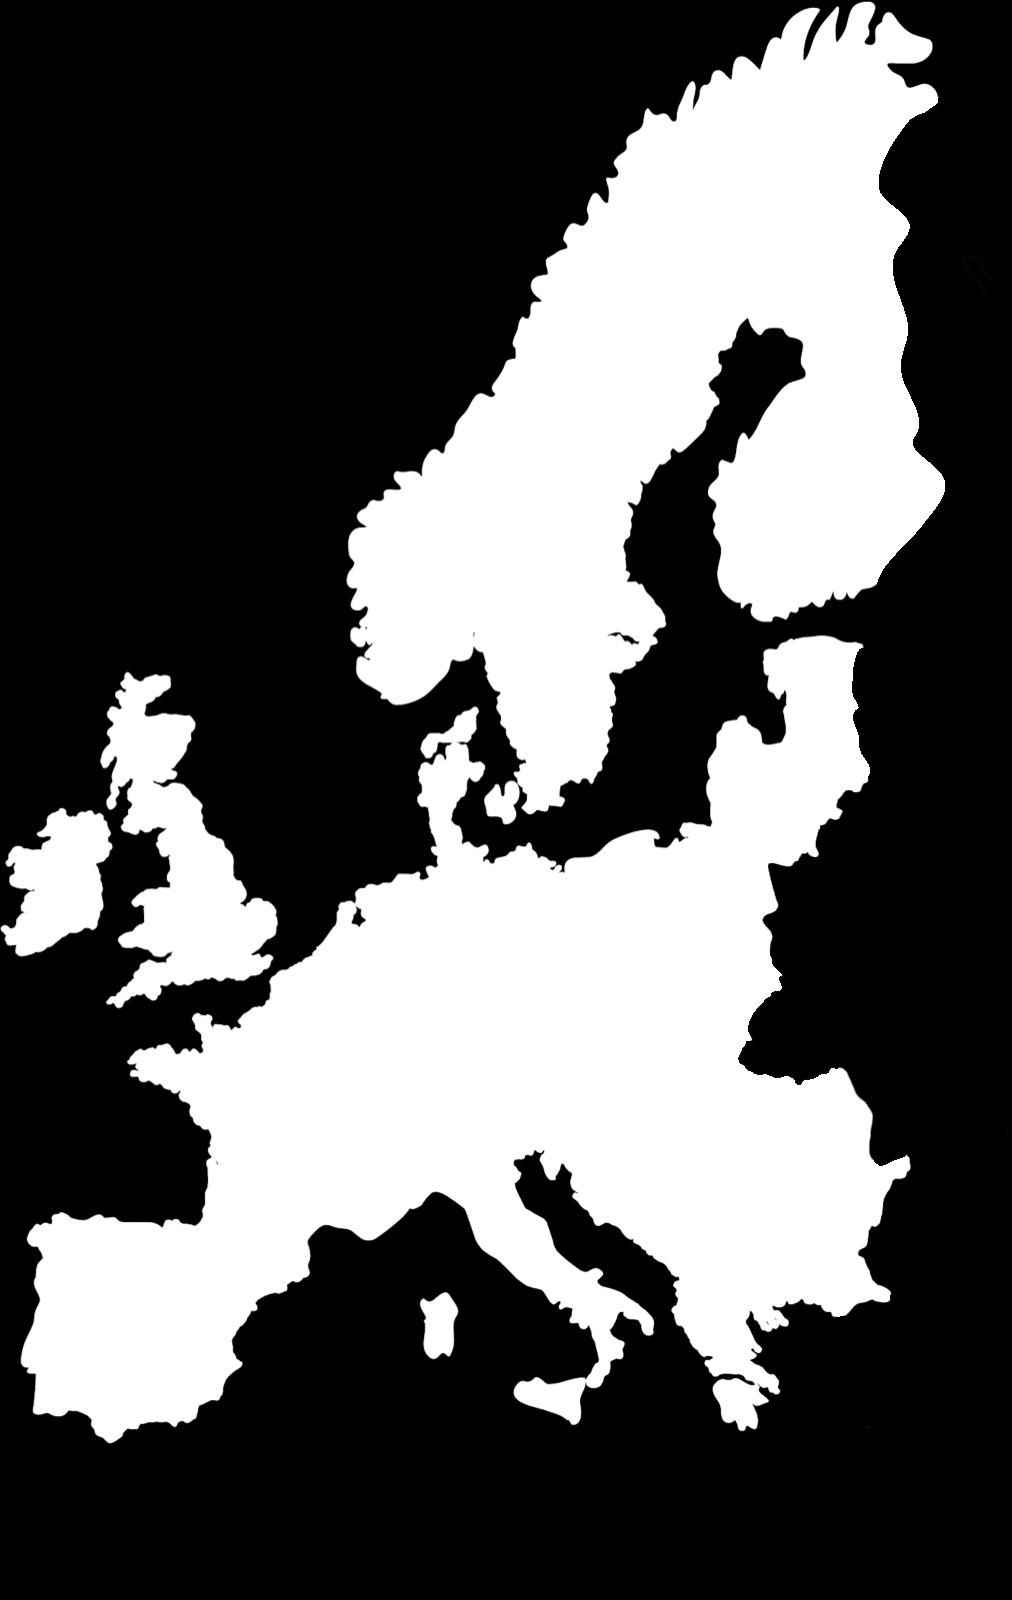 in Europe: Office Depot & Viking 31 different web sites Retail stores in 2 European countries We send out > 66,5 million